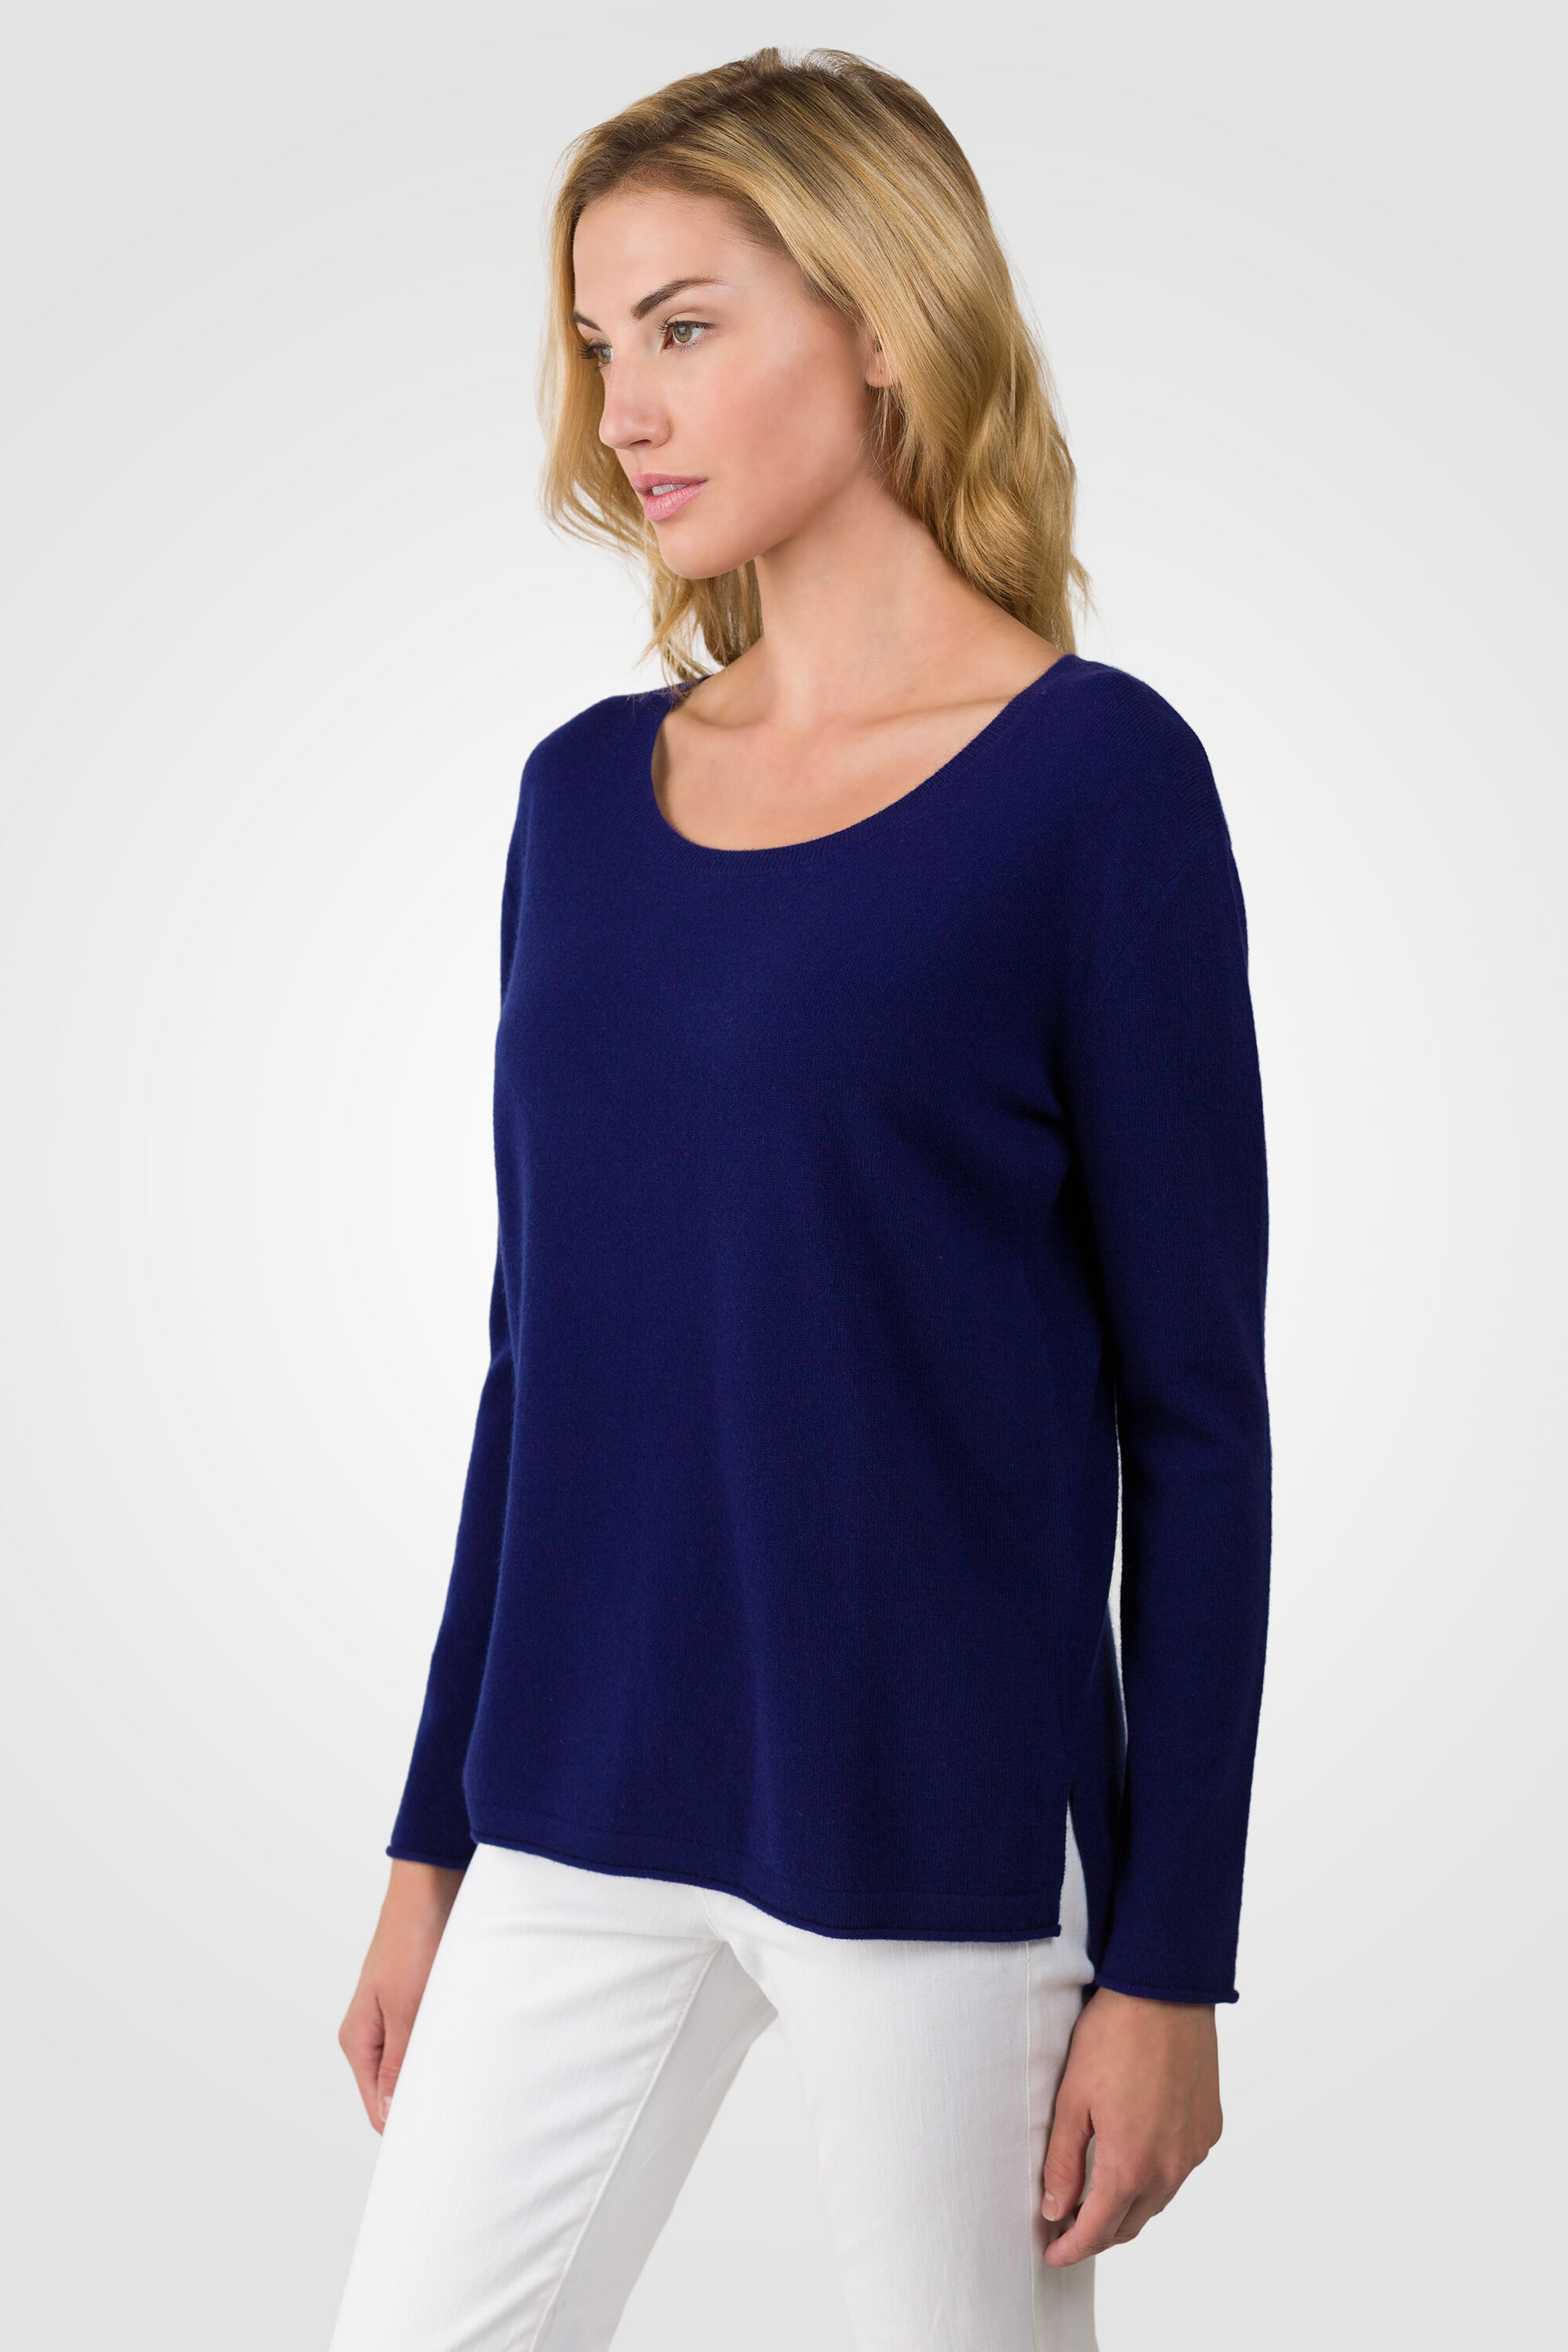 Midnight Blue Cashmere High Low Sweater - J CASHMERE